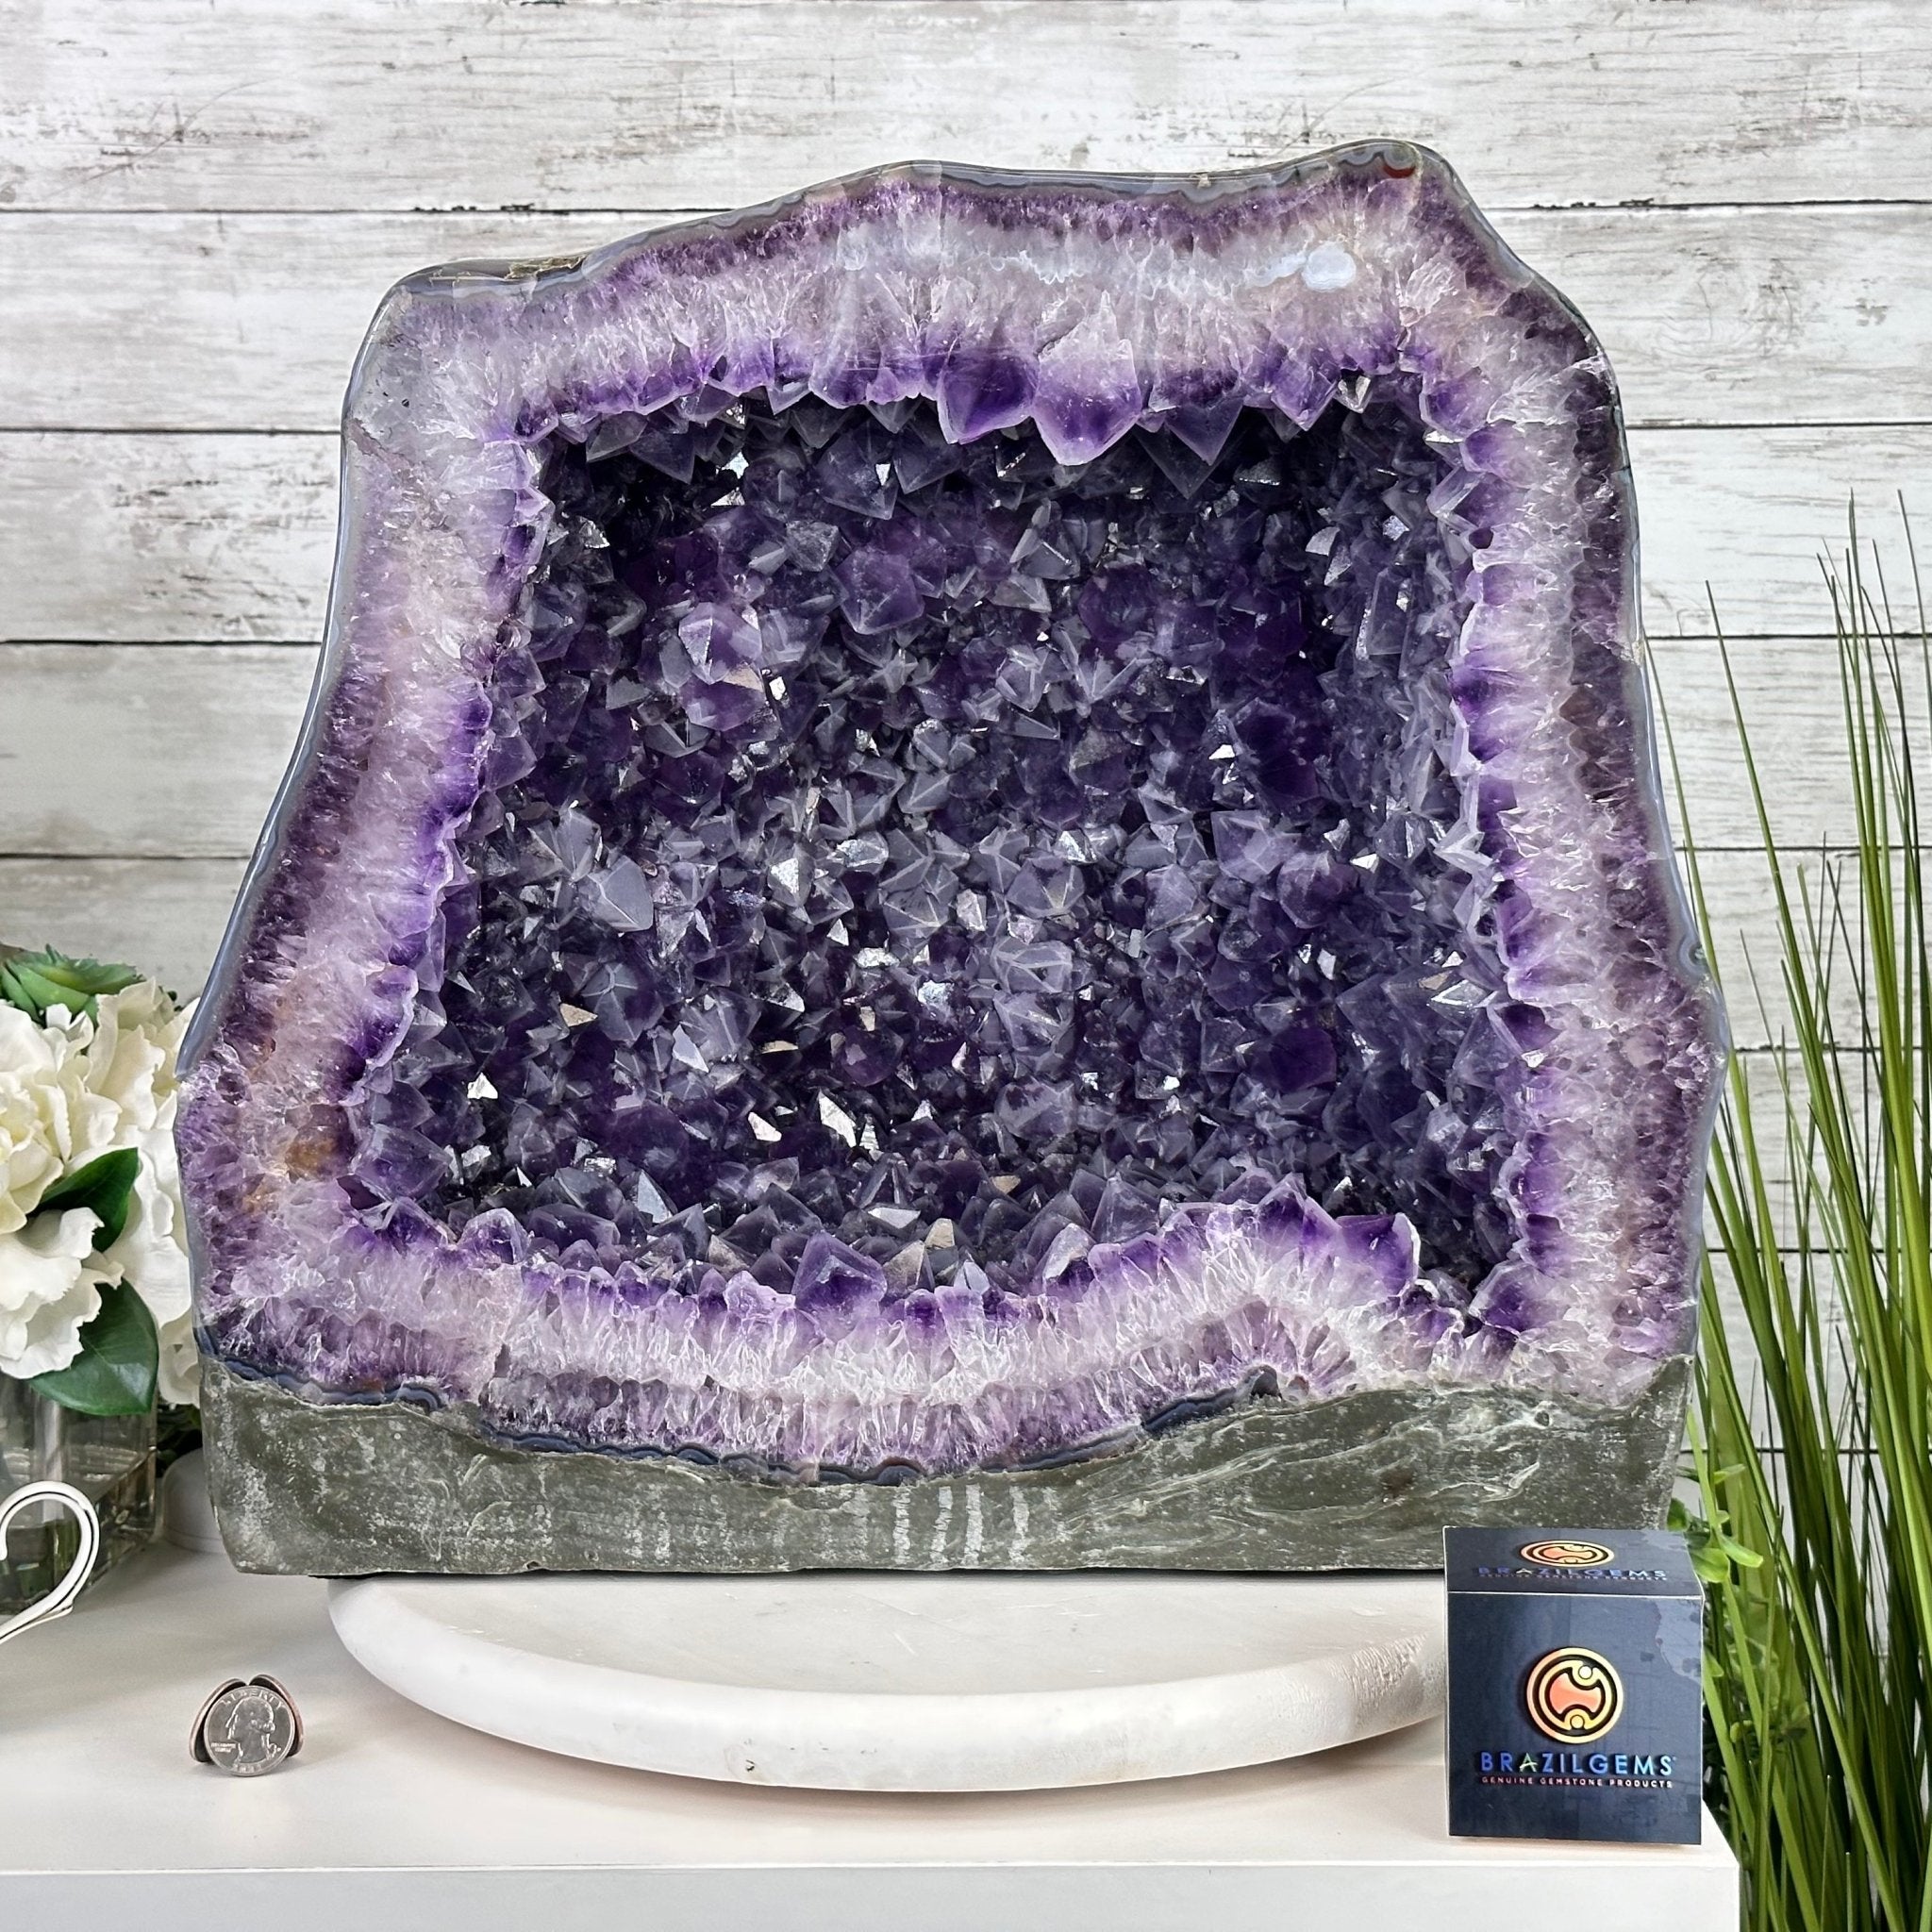 Extra Quality Polished Brazilian Amethyst Cathedral, 82.8 lbs & 15.9" tall Model #5602-0197 by Brazil Gems - Brazil GemsBrazil GemsExtra Quality Polished Brazilian Amethyst Cathedral, 82.8 lbs & 15.9" tall Model #5602-0197 by Brazil GemsPolished Cathedrals5602-0197